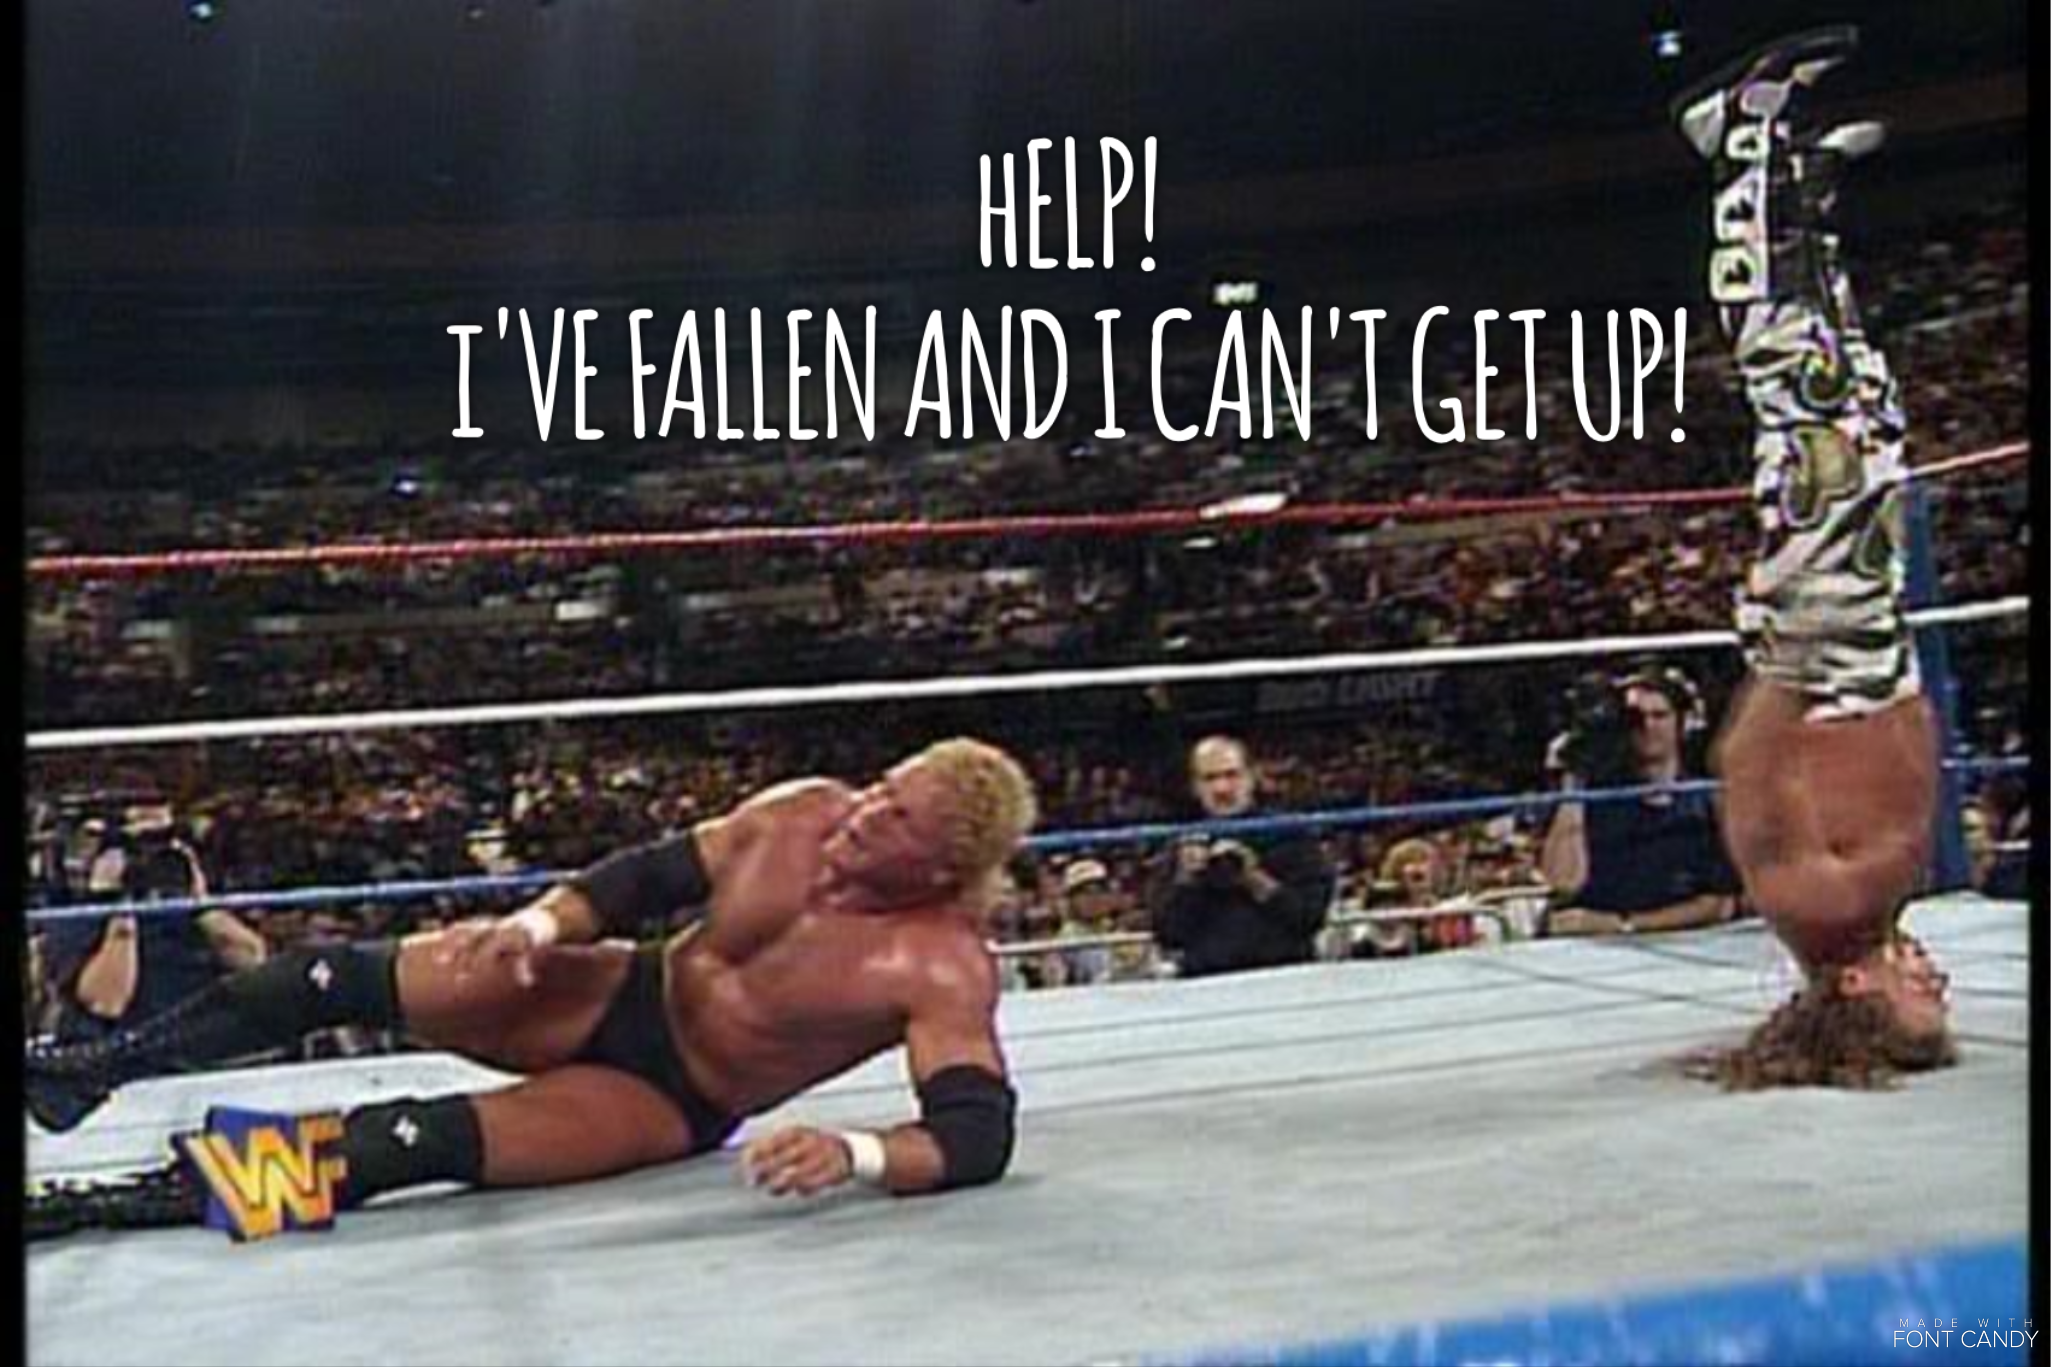 Wwe funny pictures